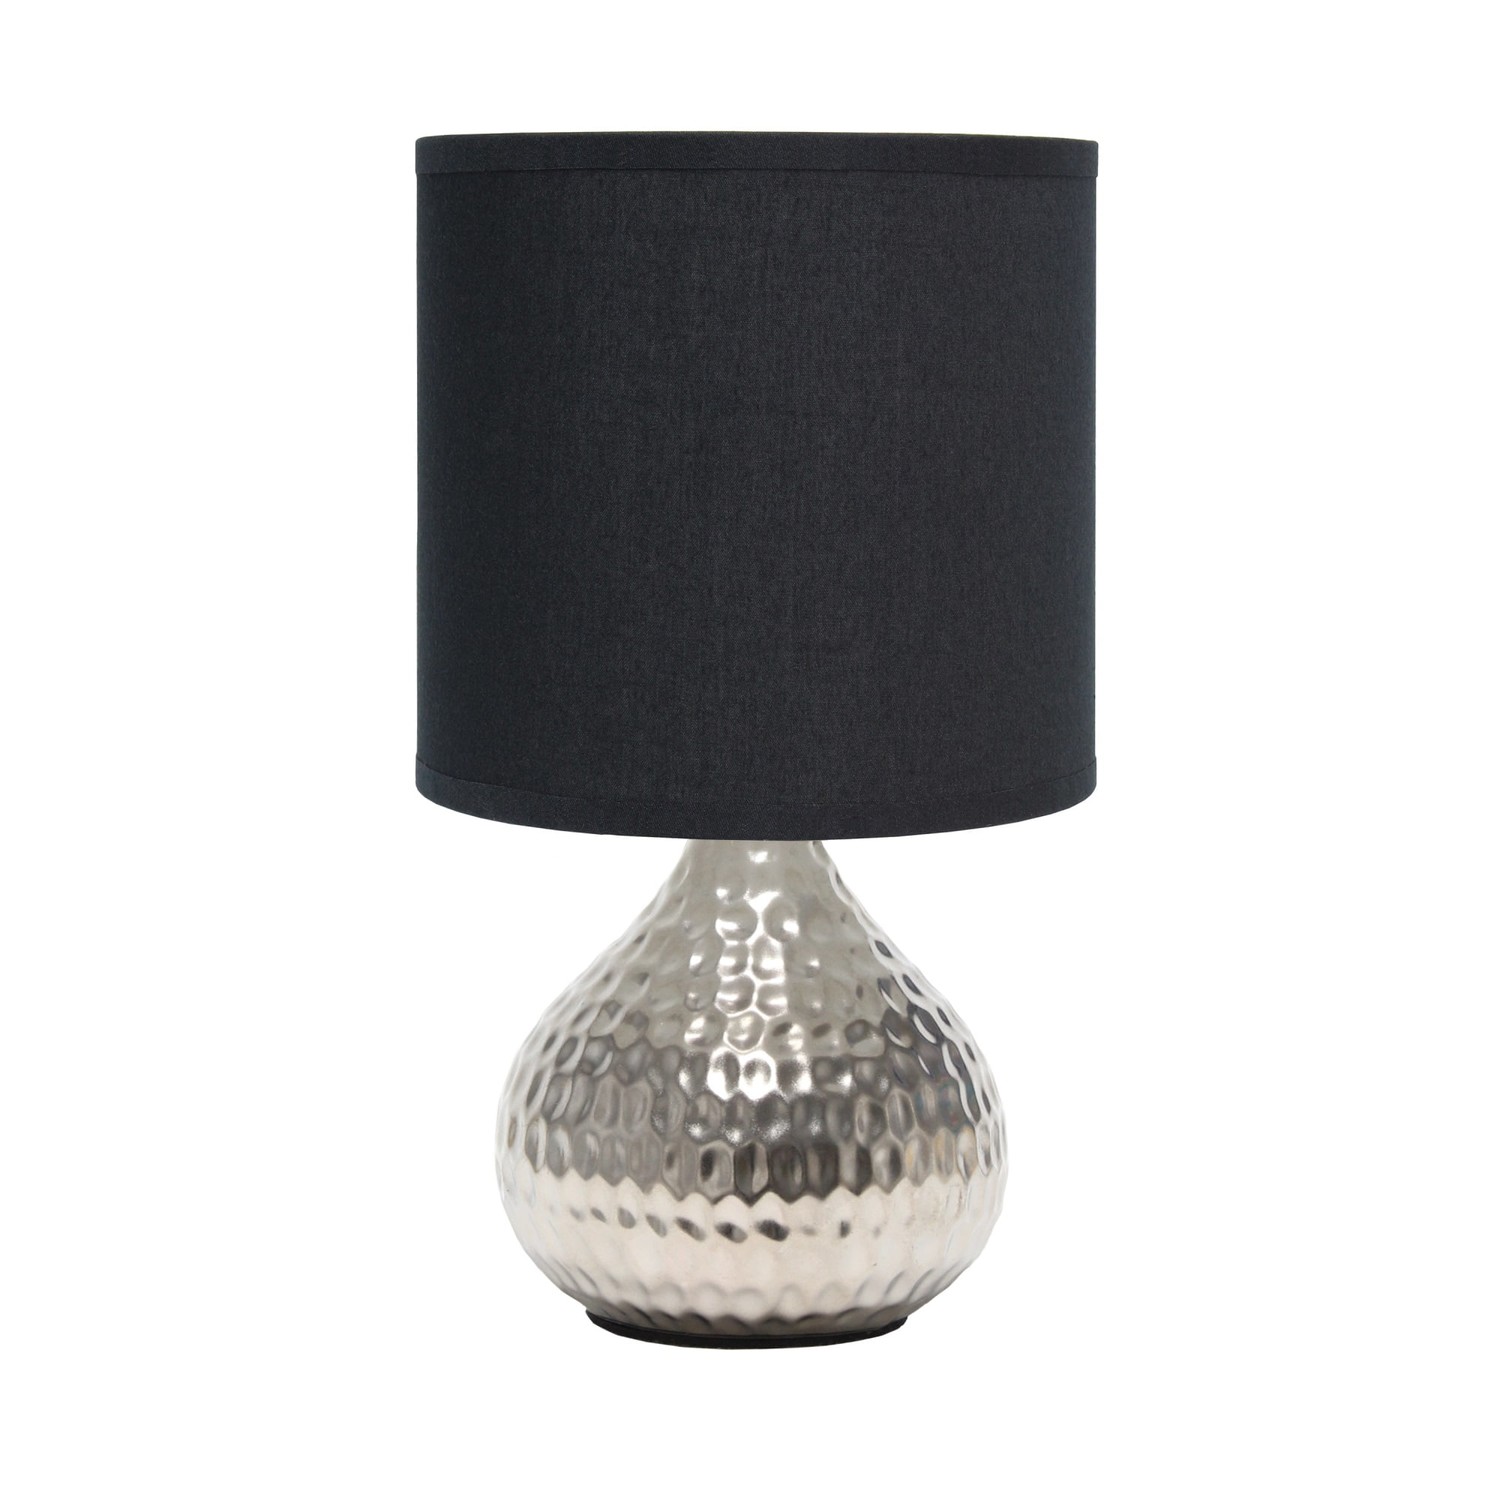 Simple Designs Hammered Silver Drip Mini Table Lamp, Black